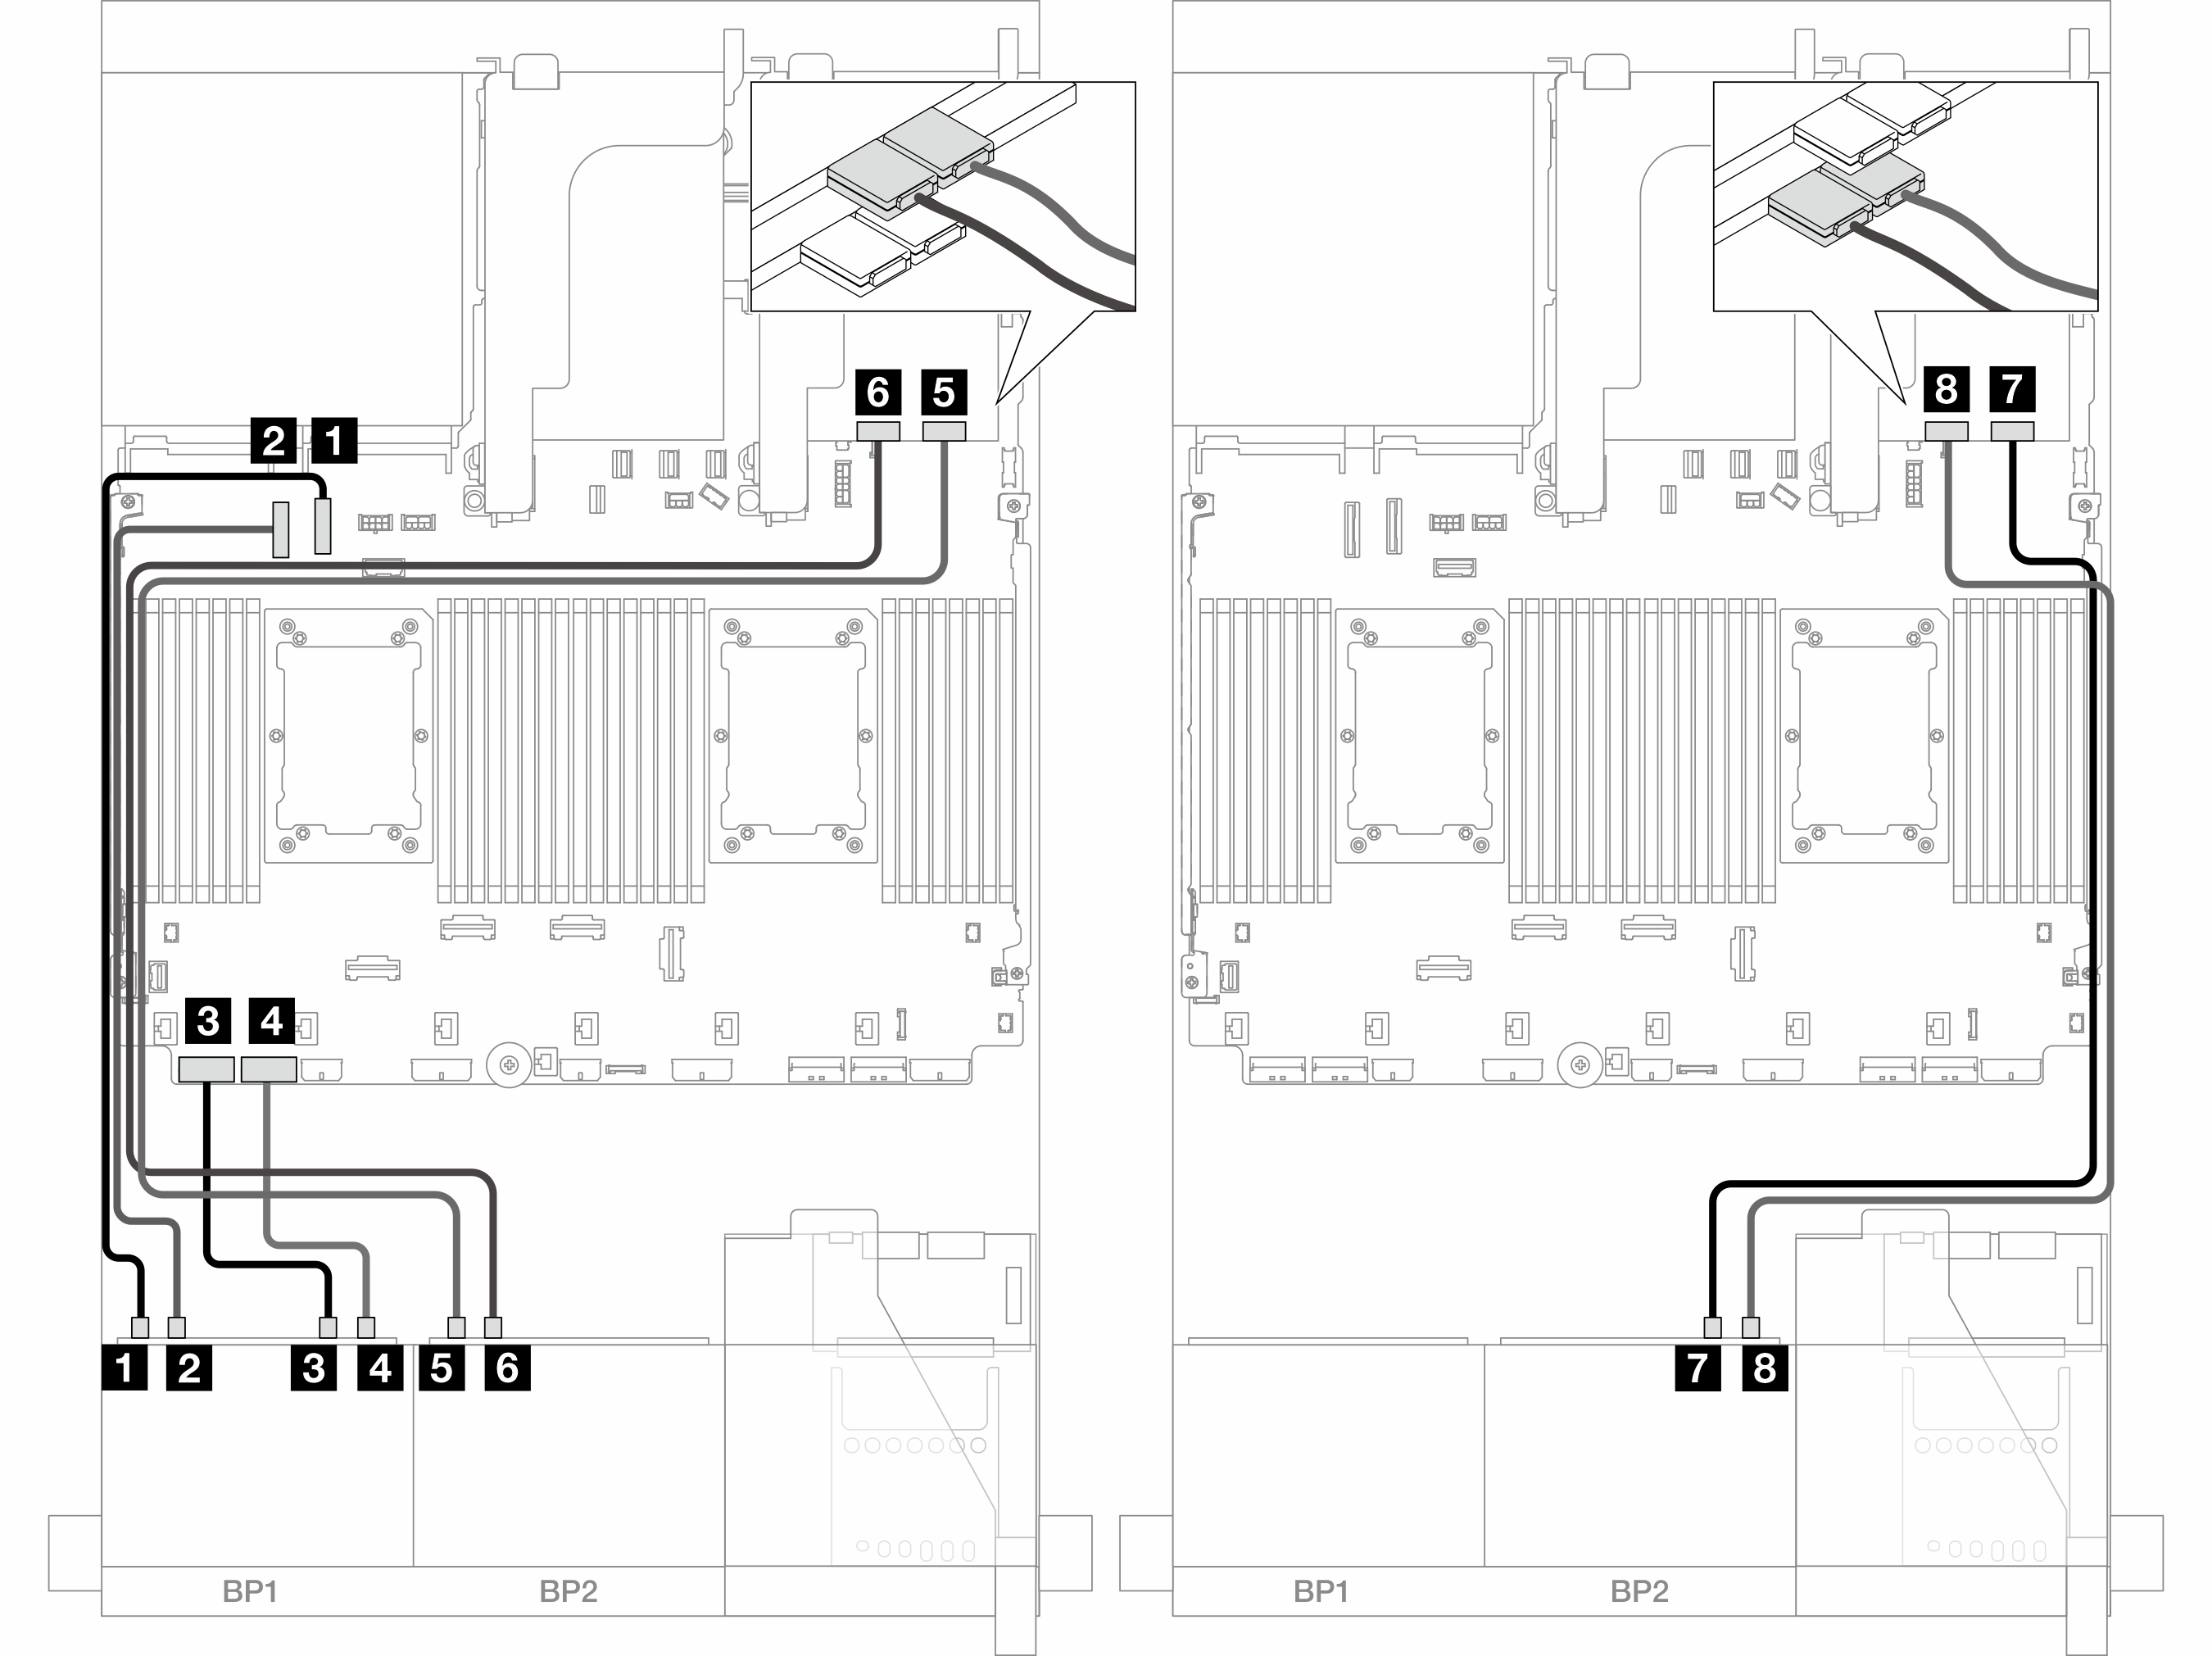 Backplane cable routing